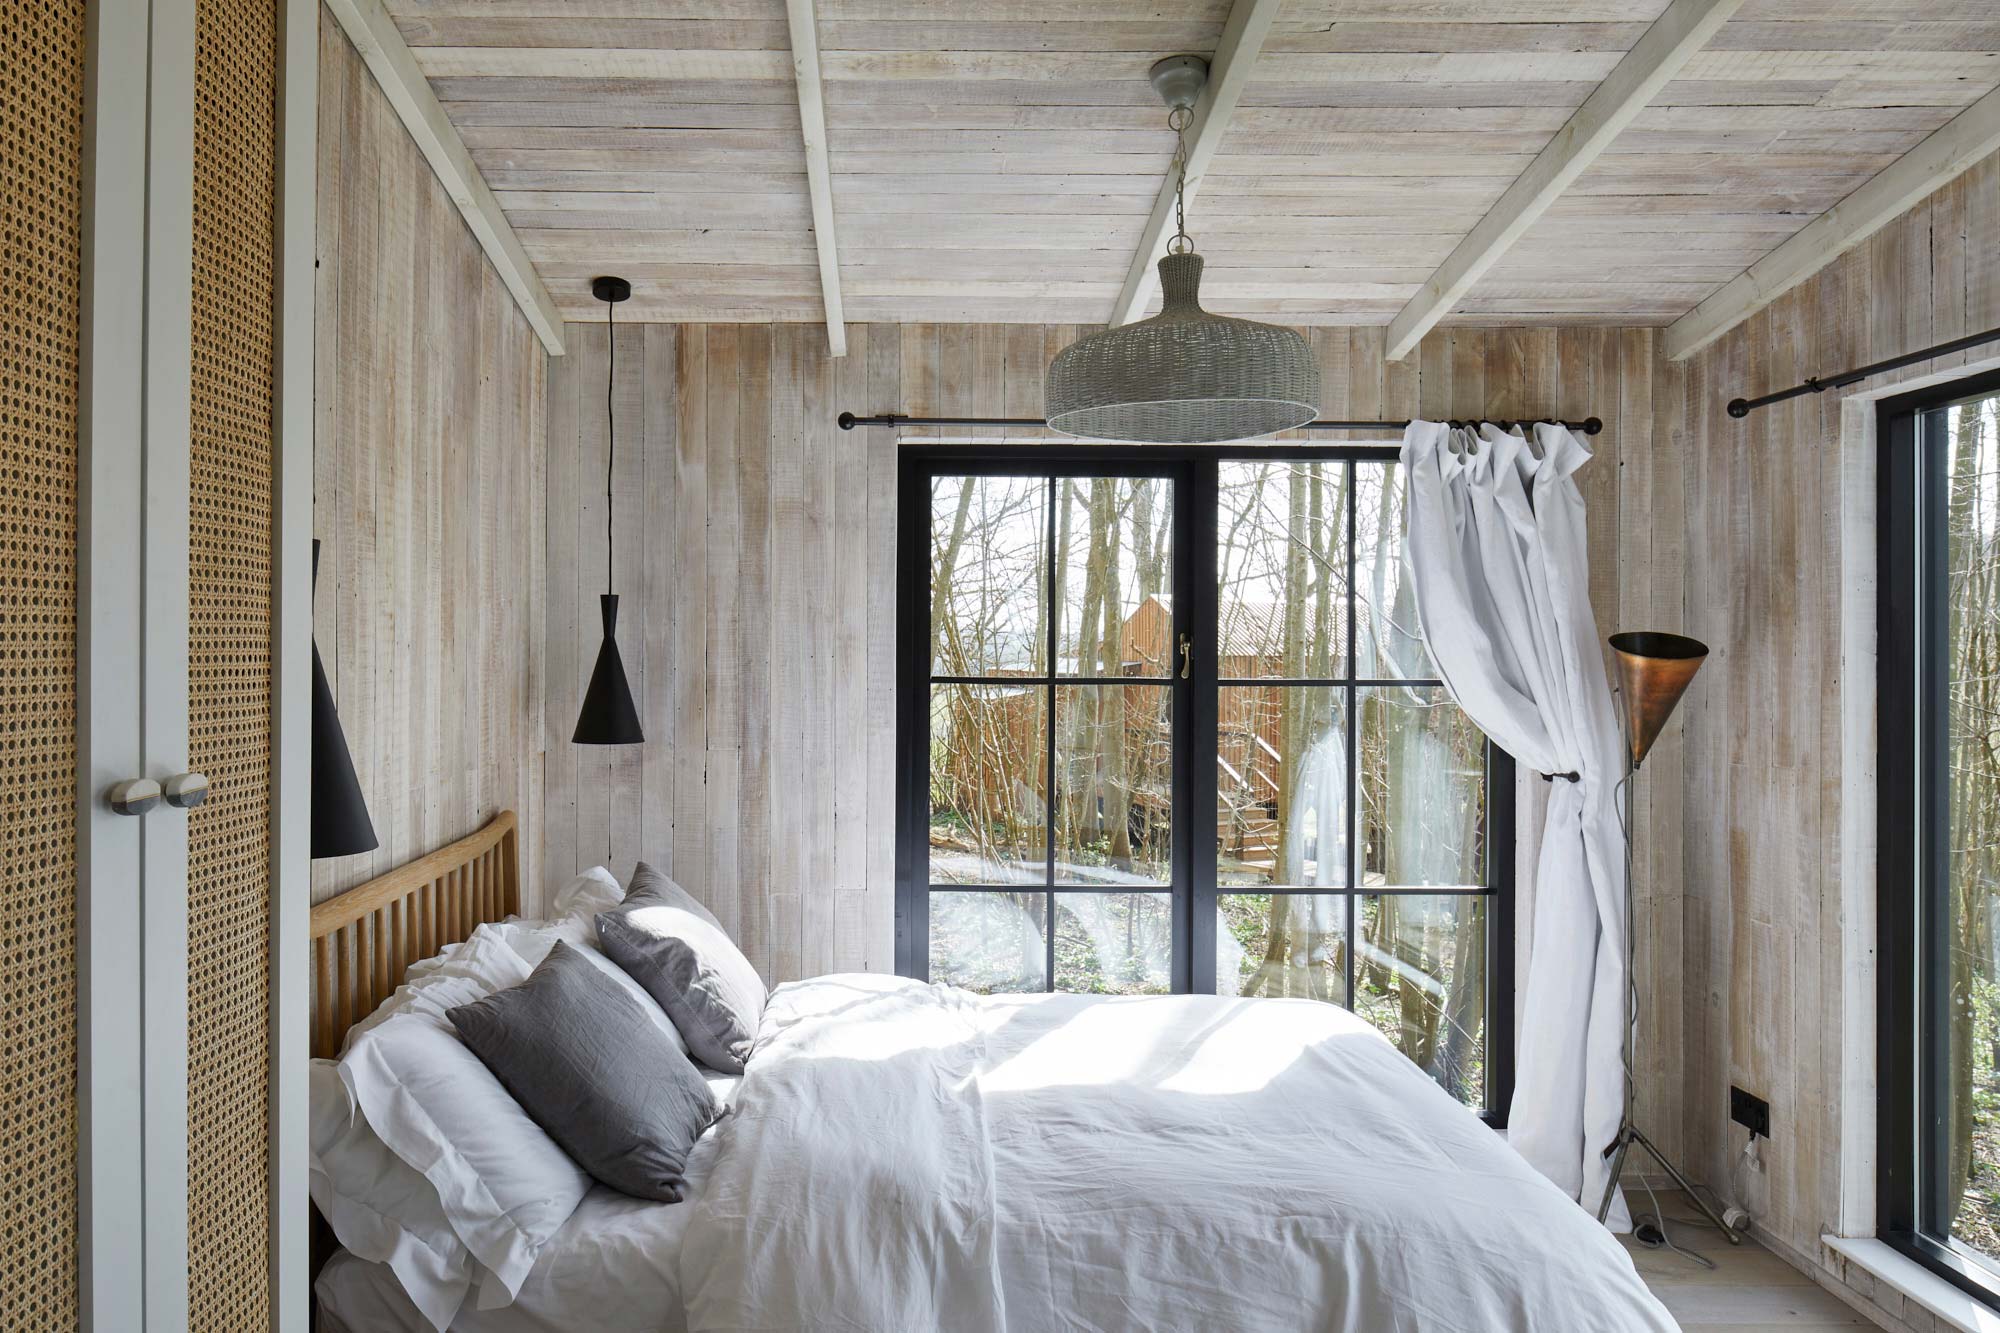 Wild Escapes treehouse cladded in rustic wood cladding